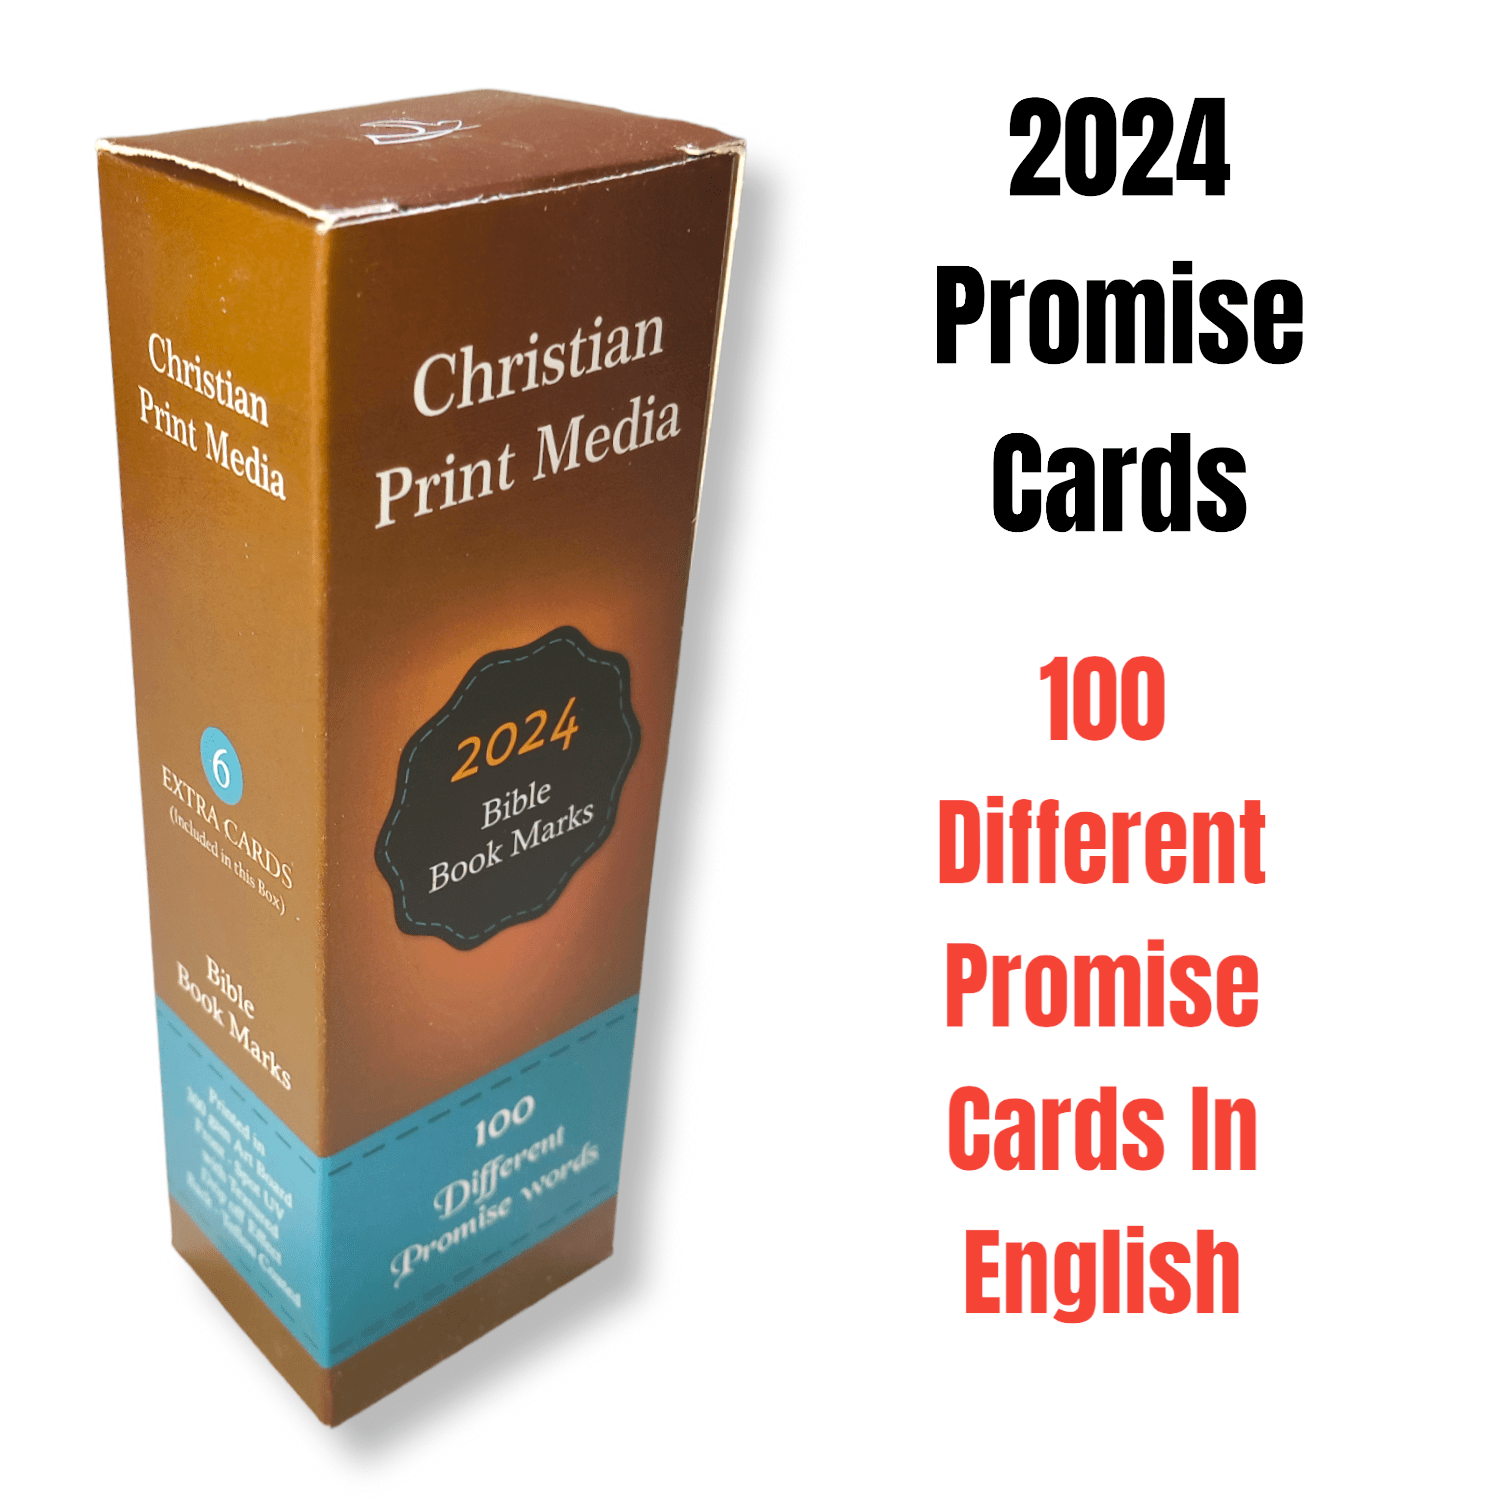 2024 Promise Cards 100 Different Promise Cards In English CHRISTIAN